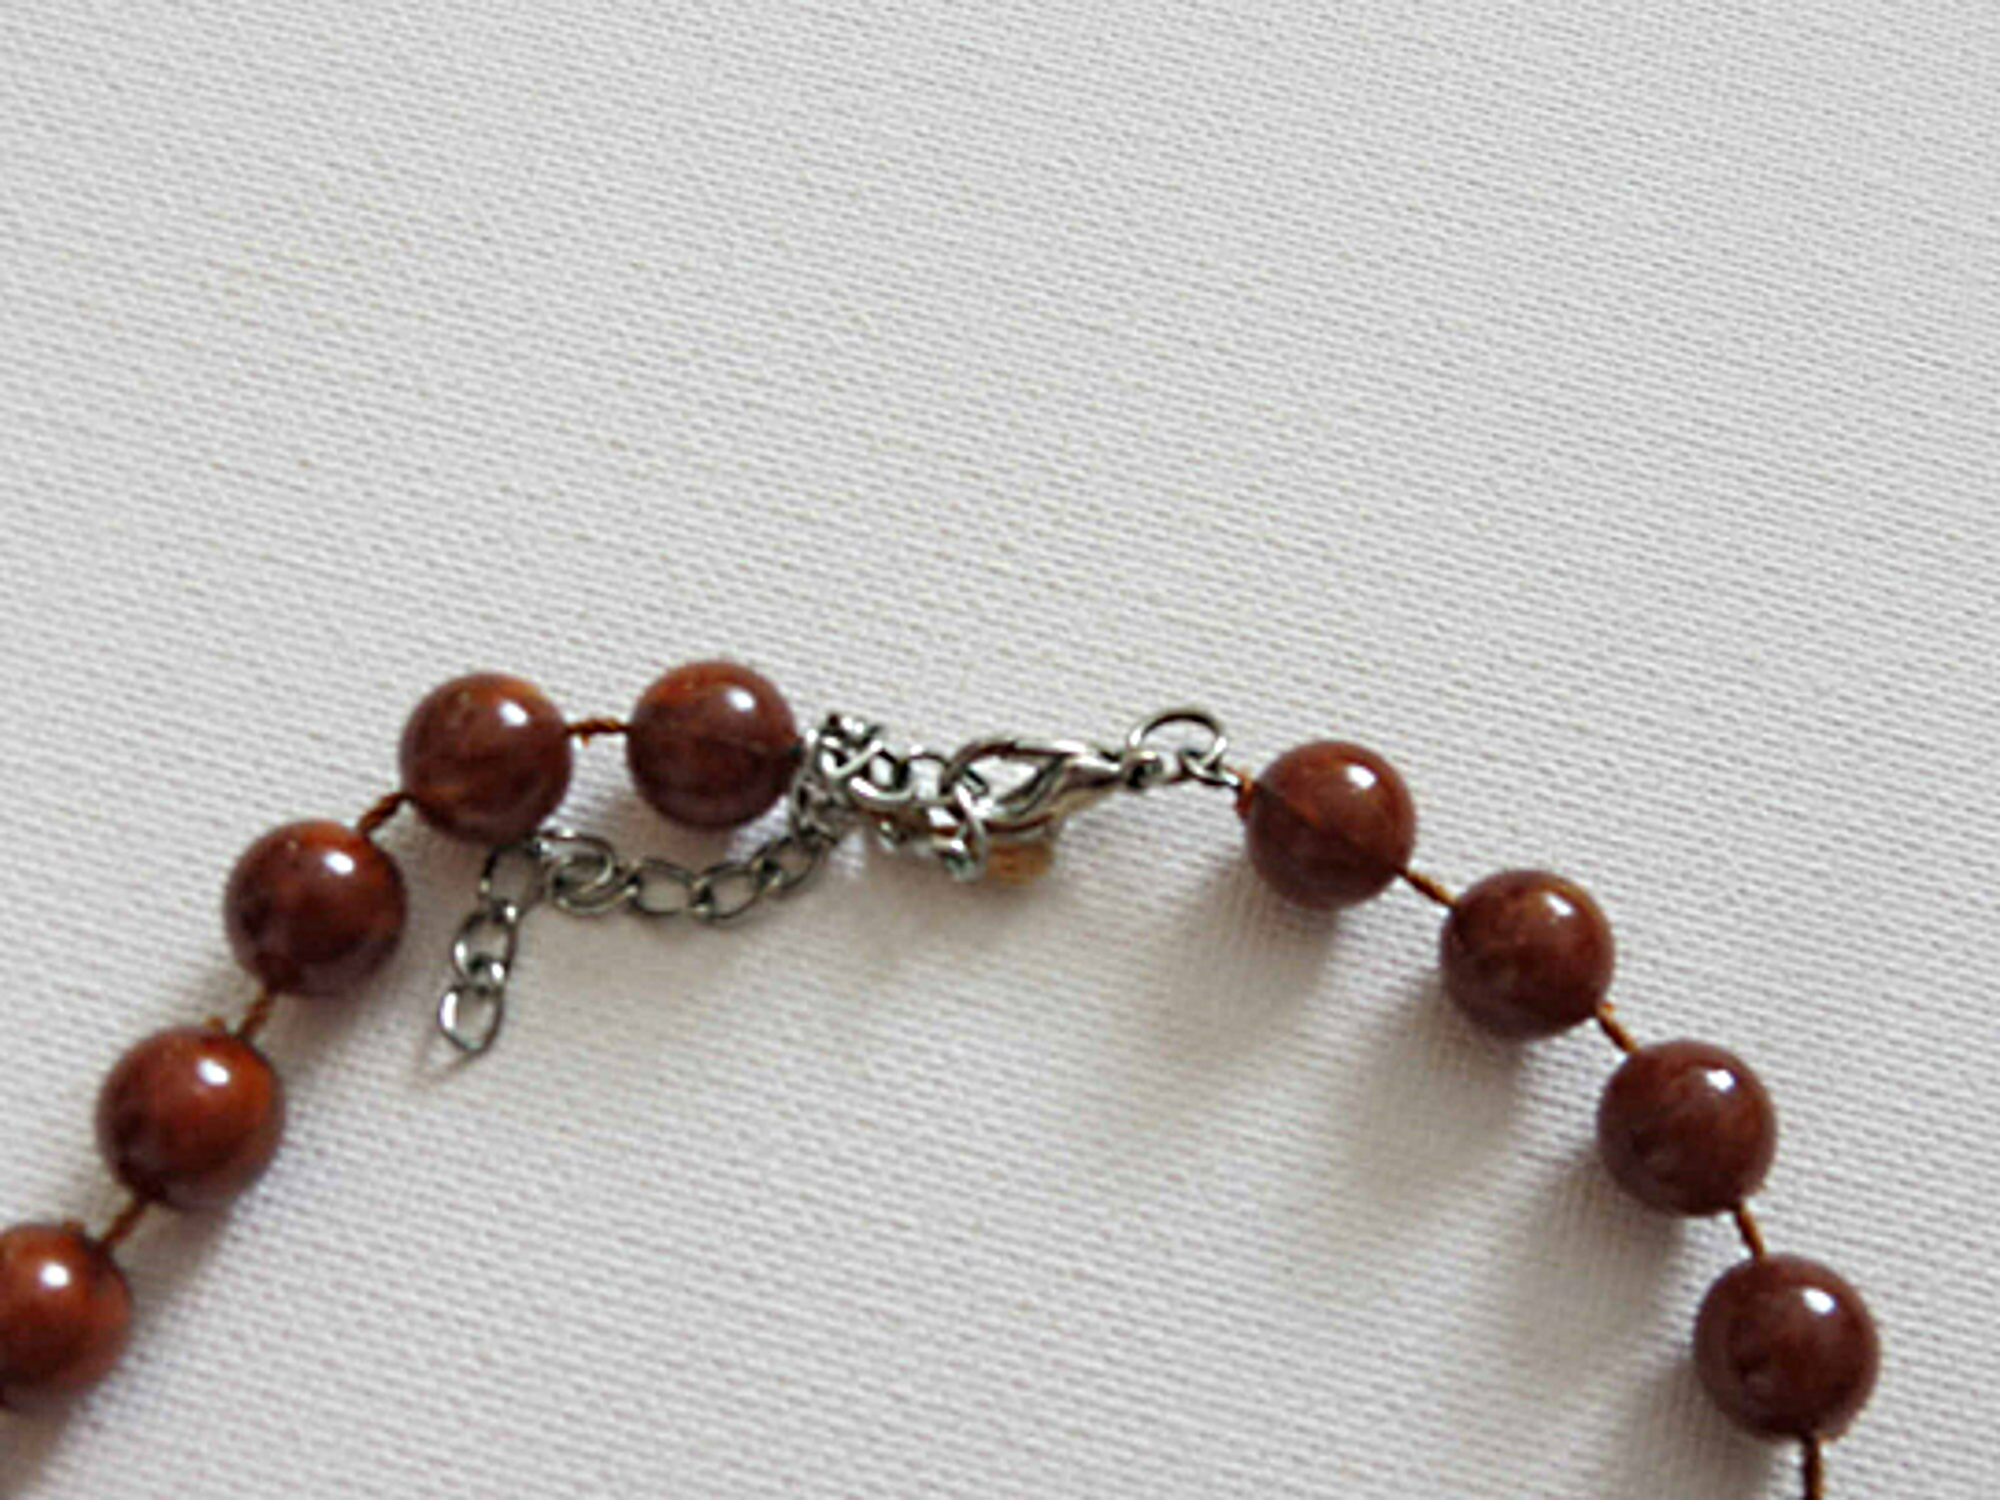 Necklace of Brown Marbled Beads